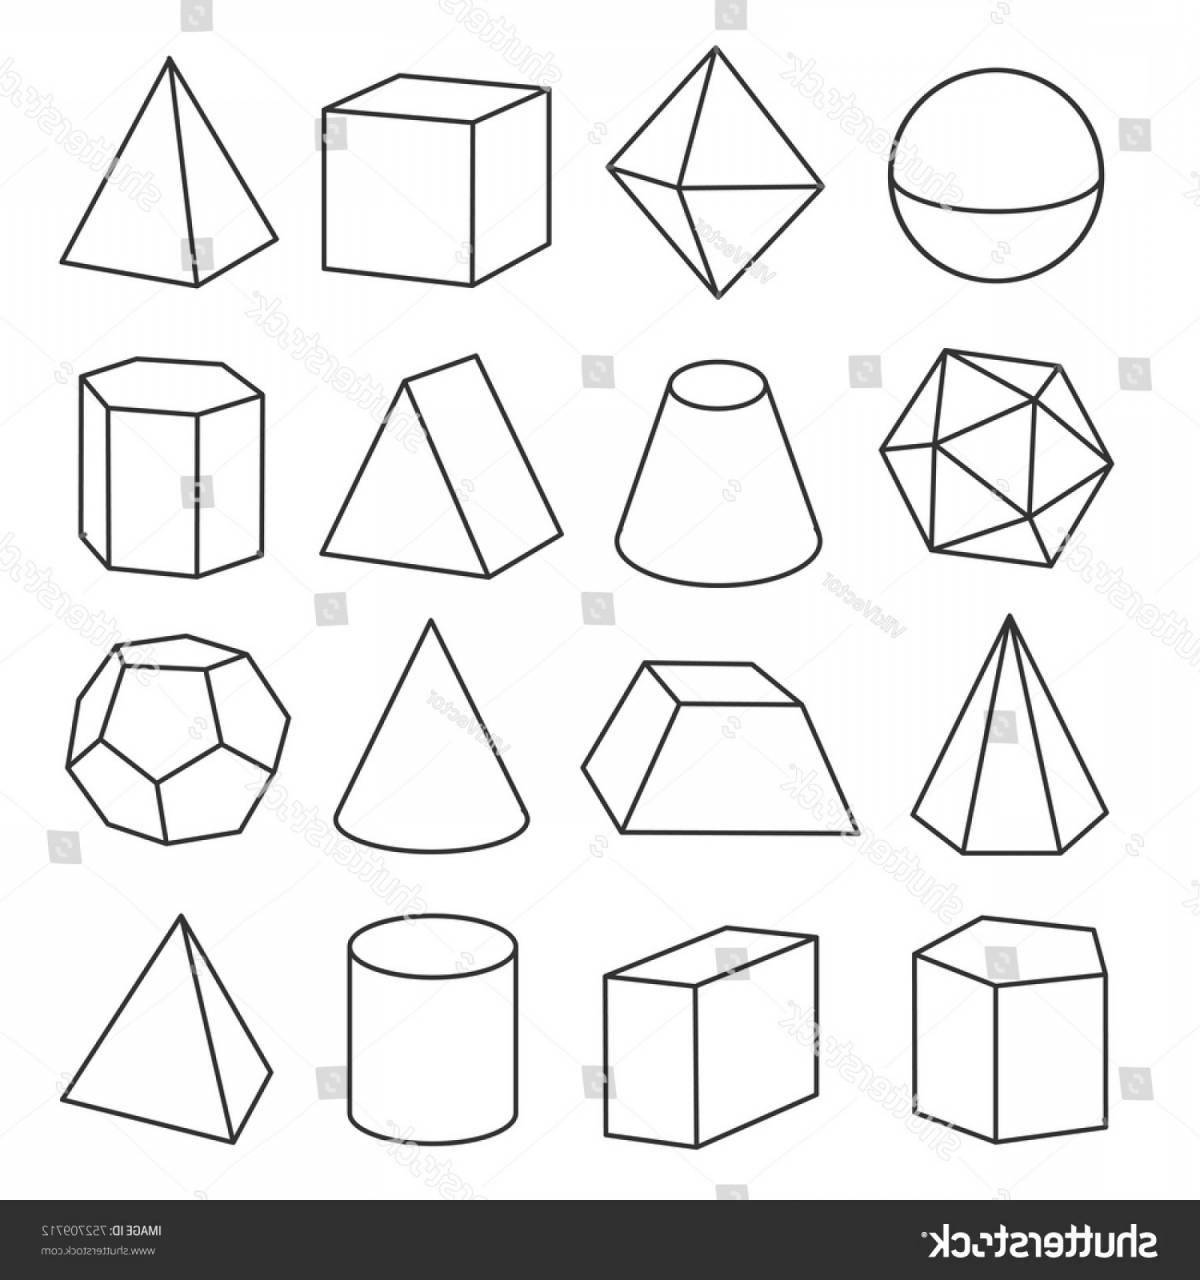 Coloring page of complex 3D shape